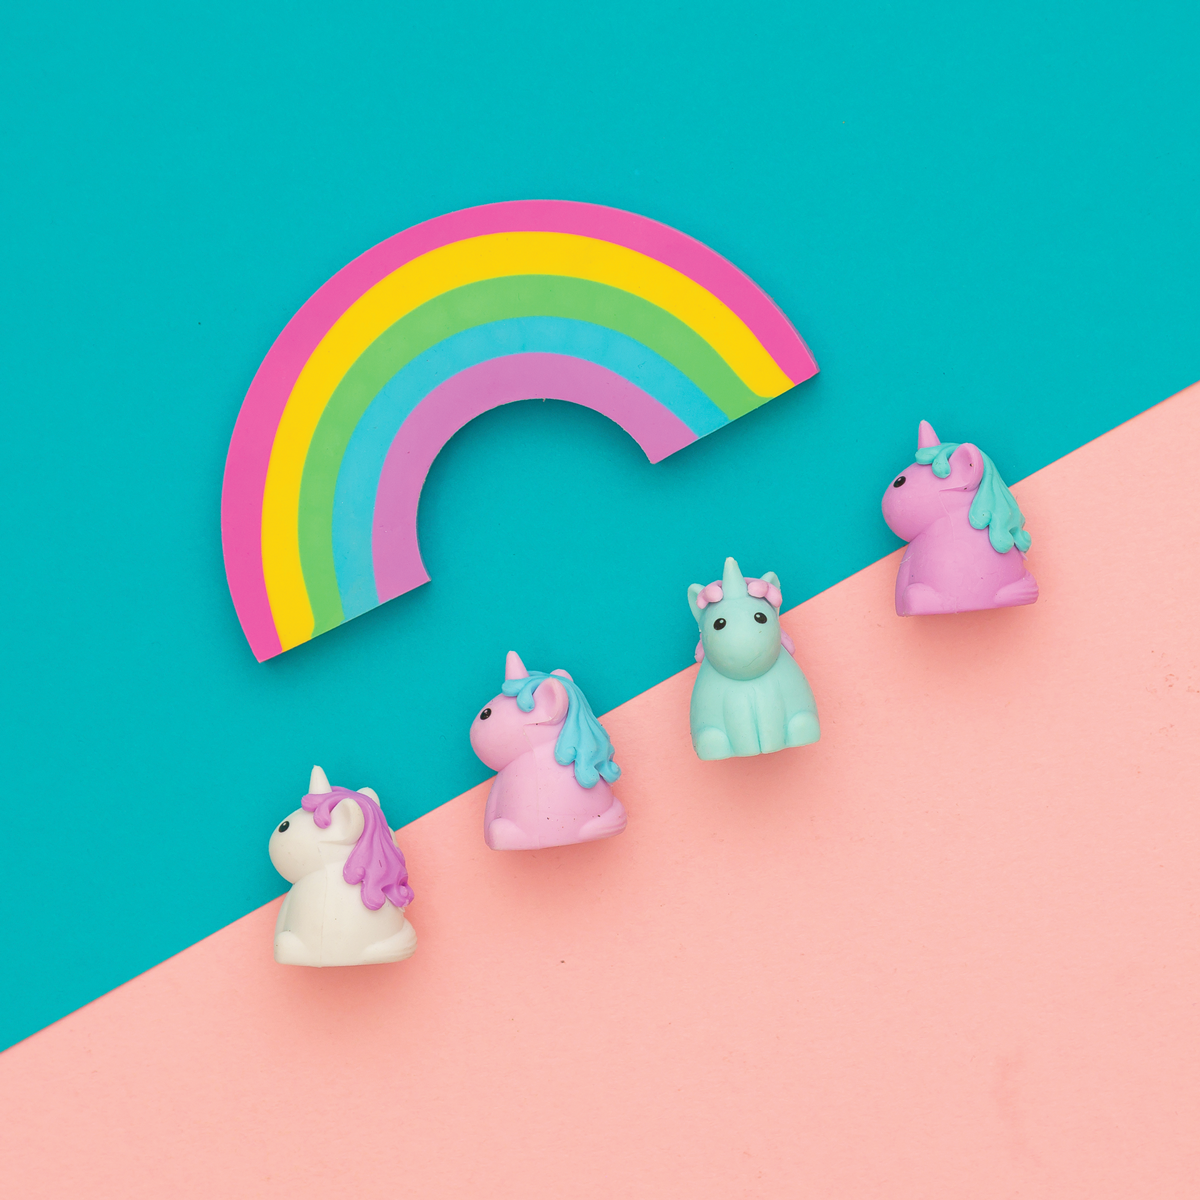 2 unicorn erasers and a large rainbow pencil eraser from the Unique Unicorns scented eraser set